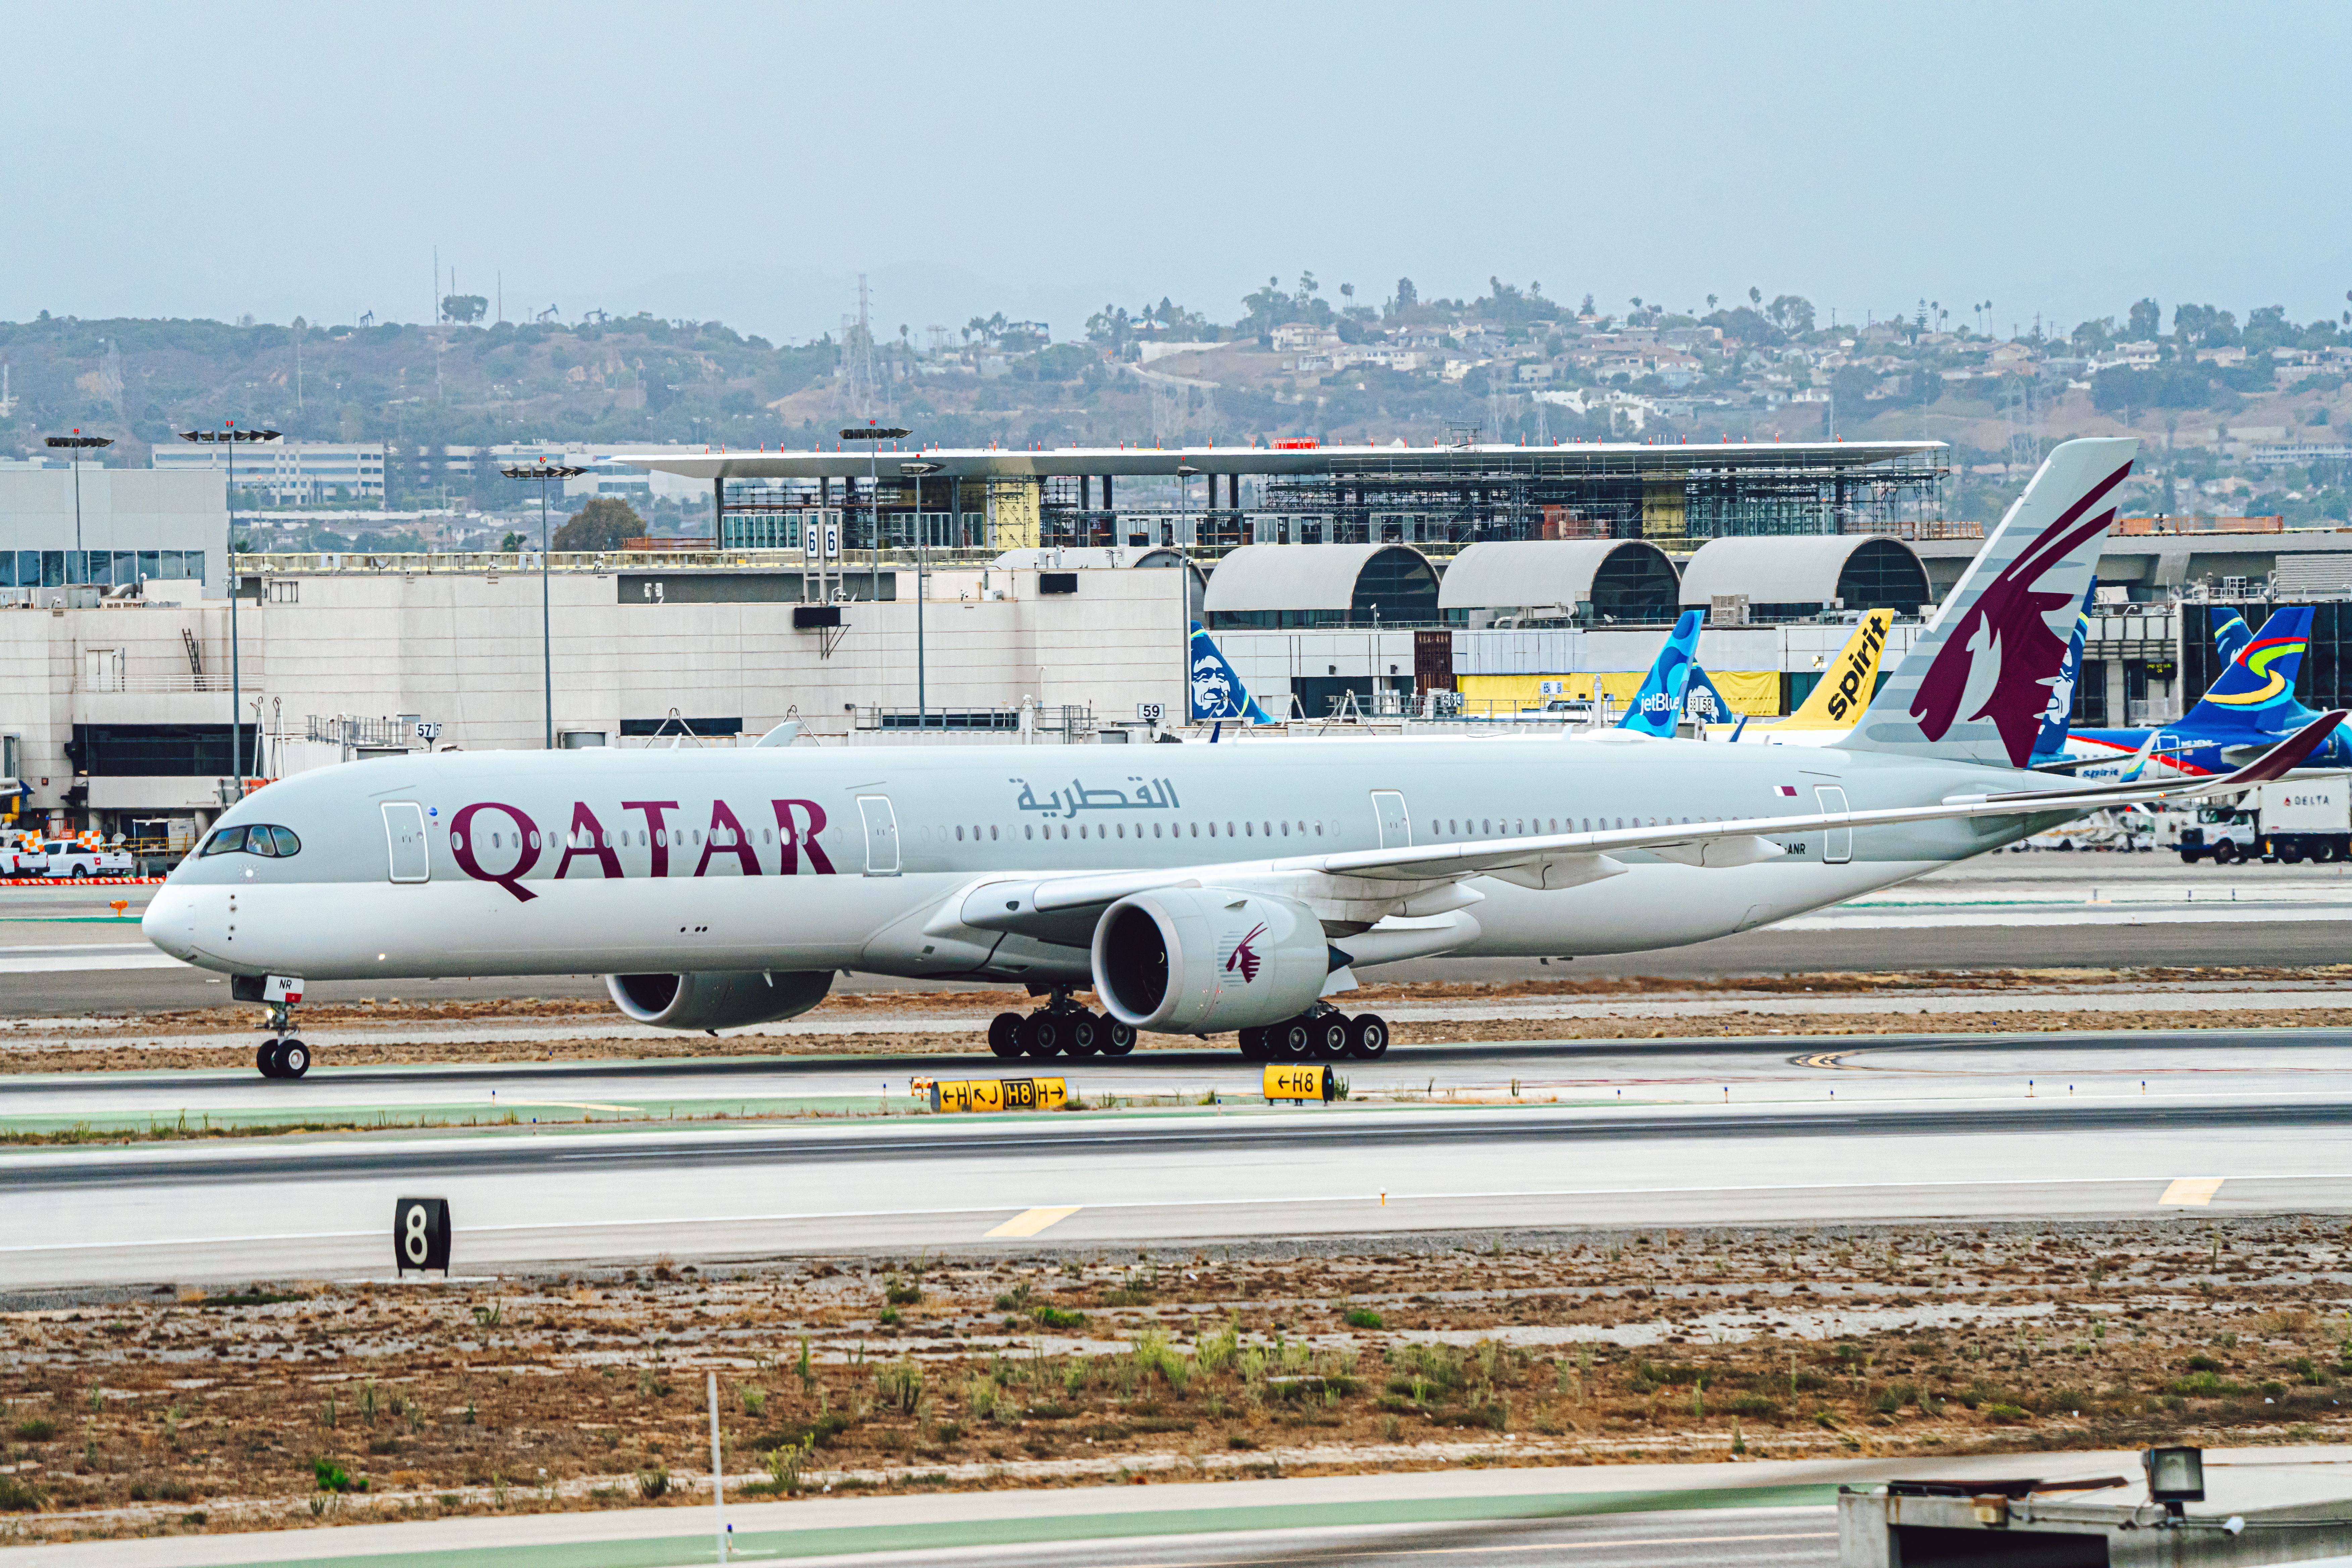 Lukas Souza Airbus A350 taxiing at LAX